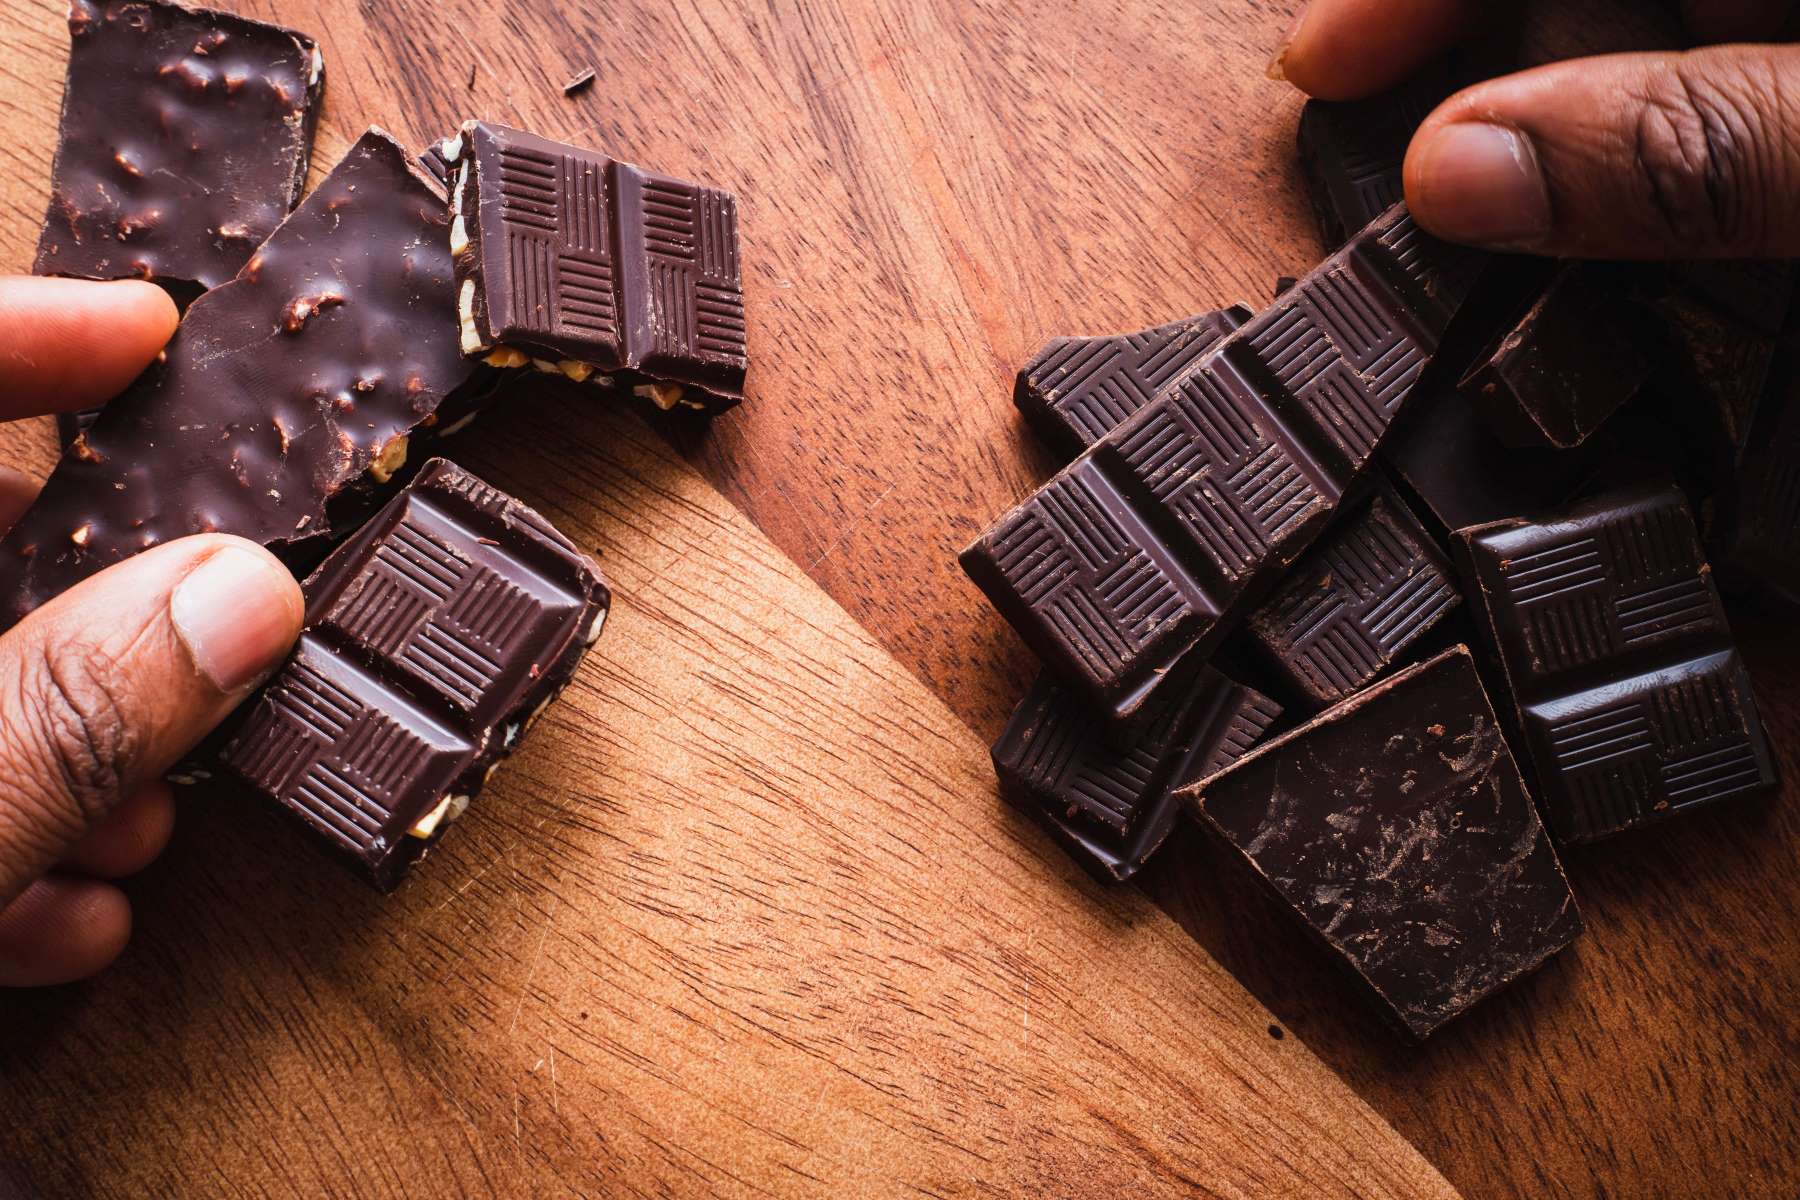 The Surprising Reason Behind Your Intense Chocolate Cravings